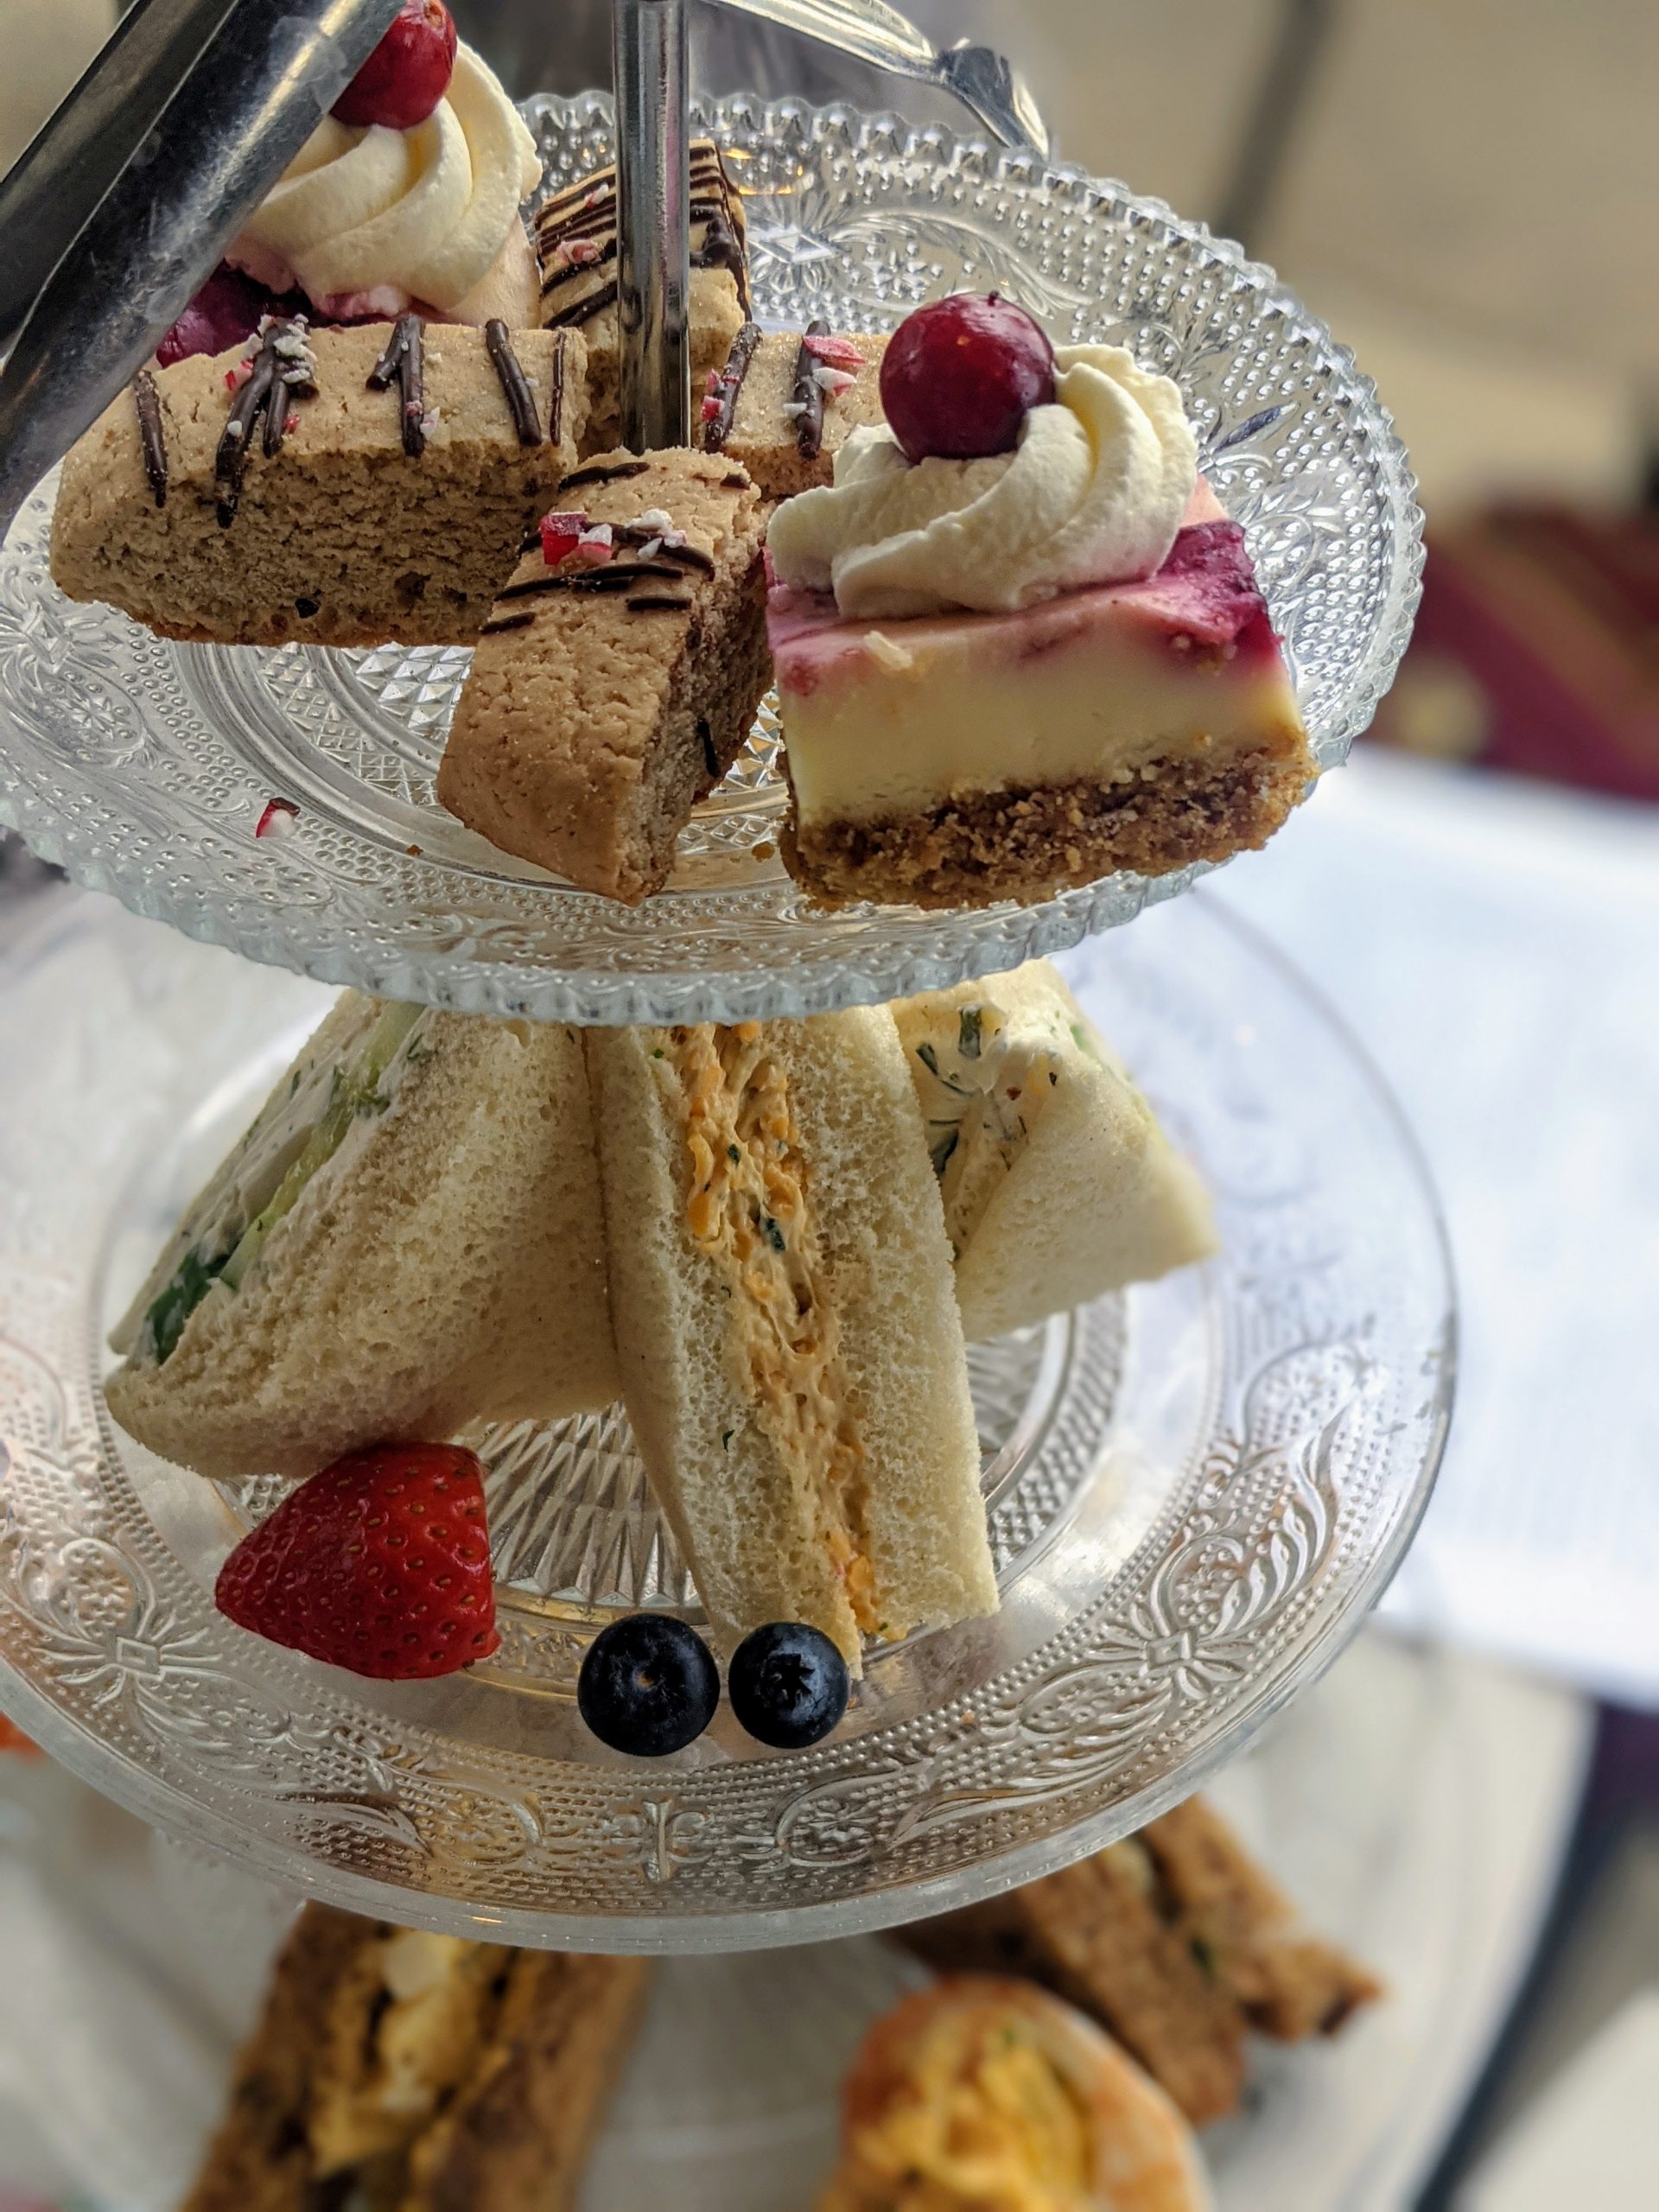 Best Places for Afternoon Tea in Plano